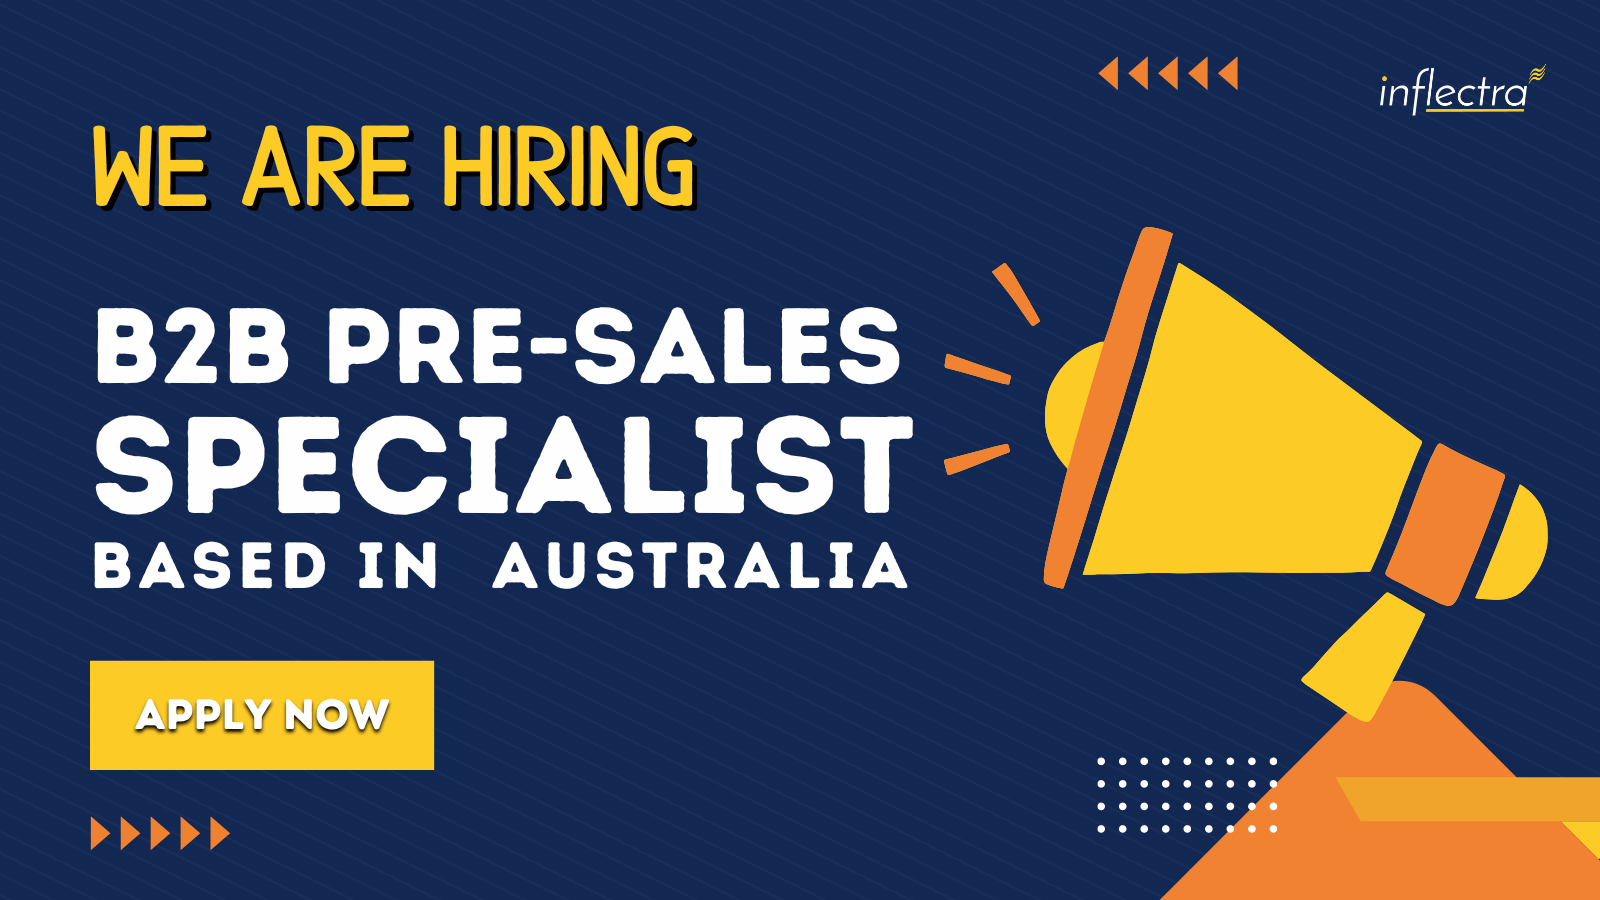 inflectra-hiring-b2b-pre-sales-specialist-based-in-australia-image